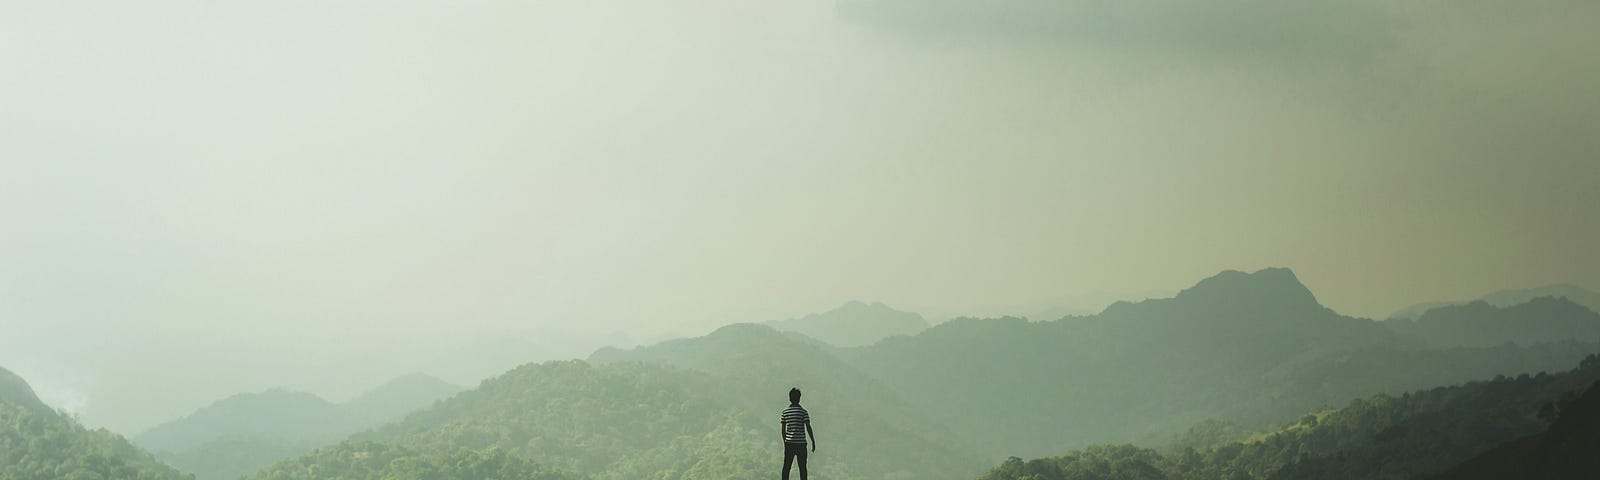 a man stands on the top of a hill among many other hills